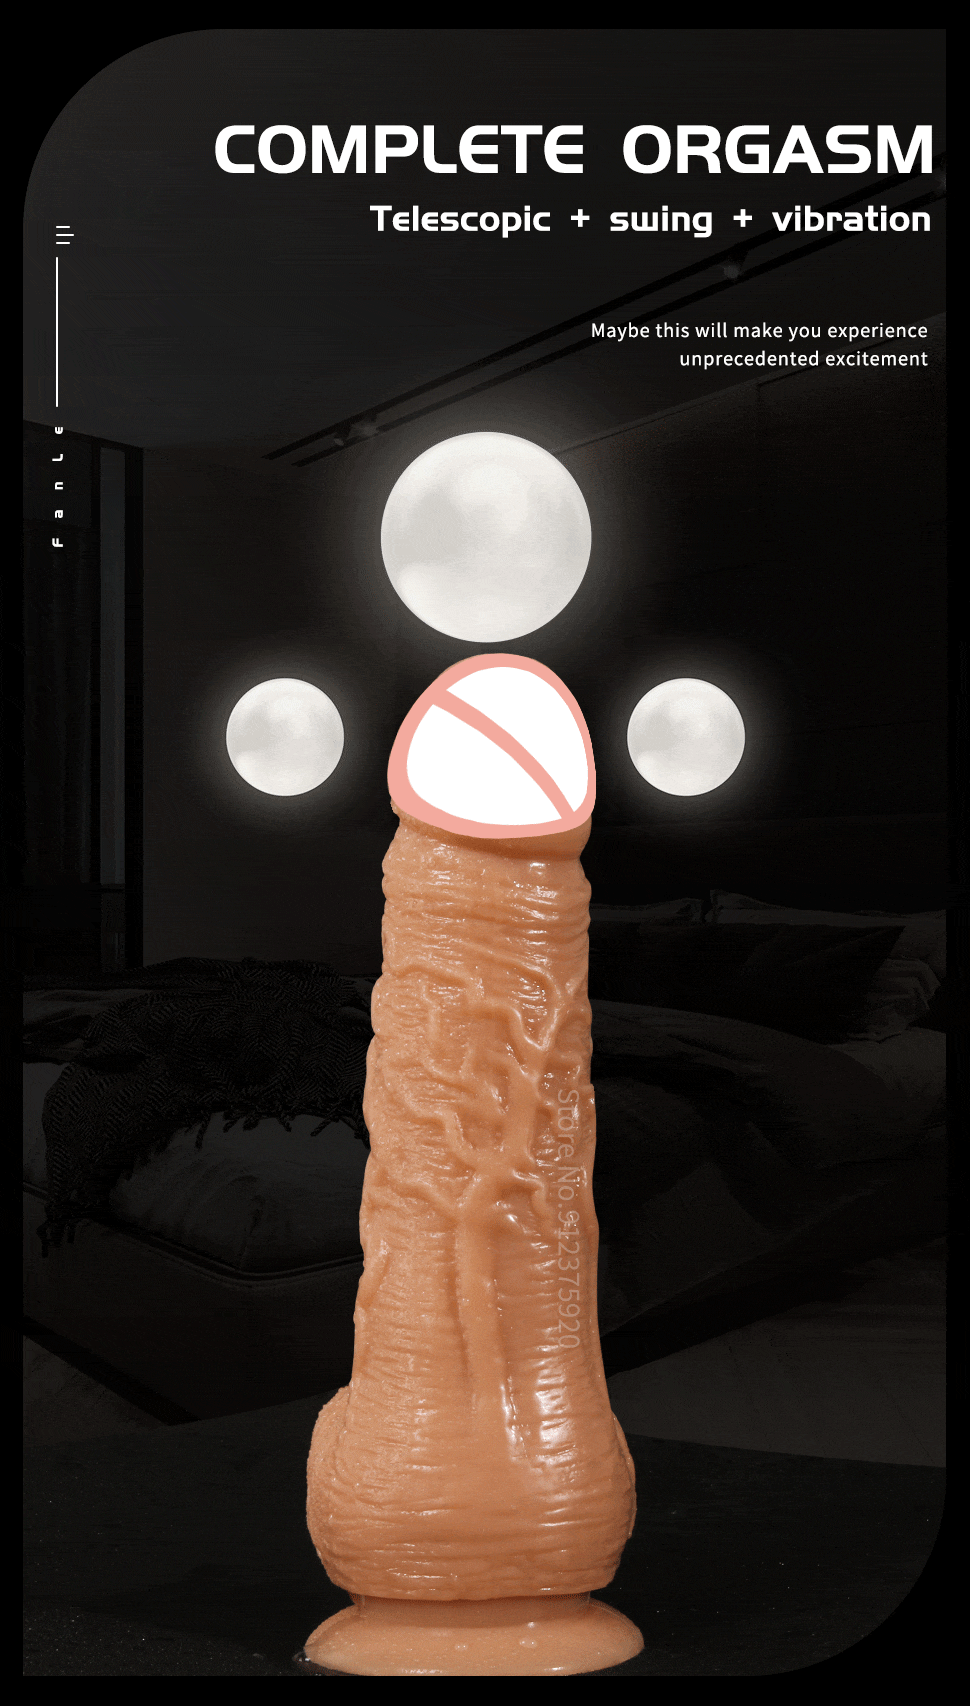 ultra realistic dildo give you complete orgasm